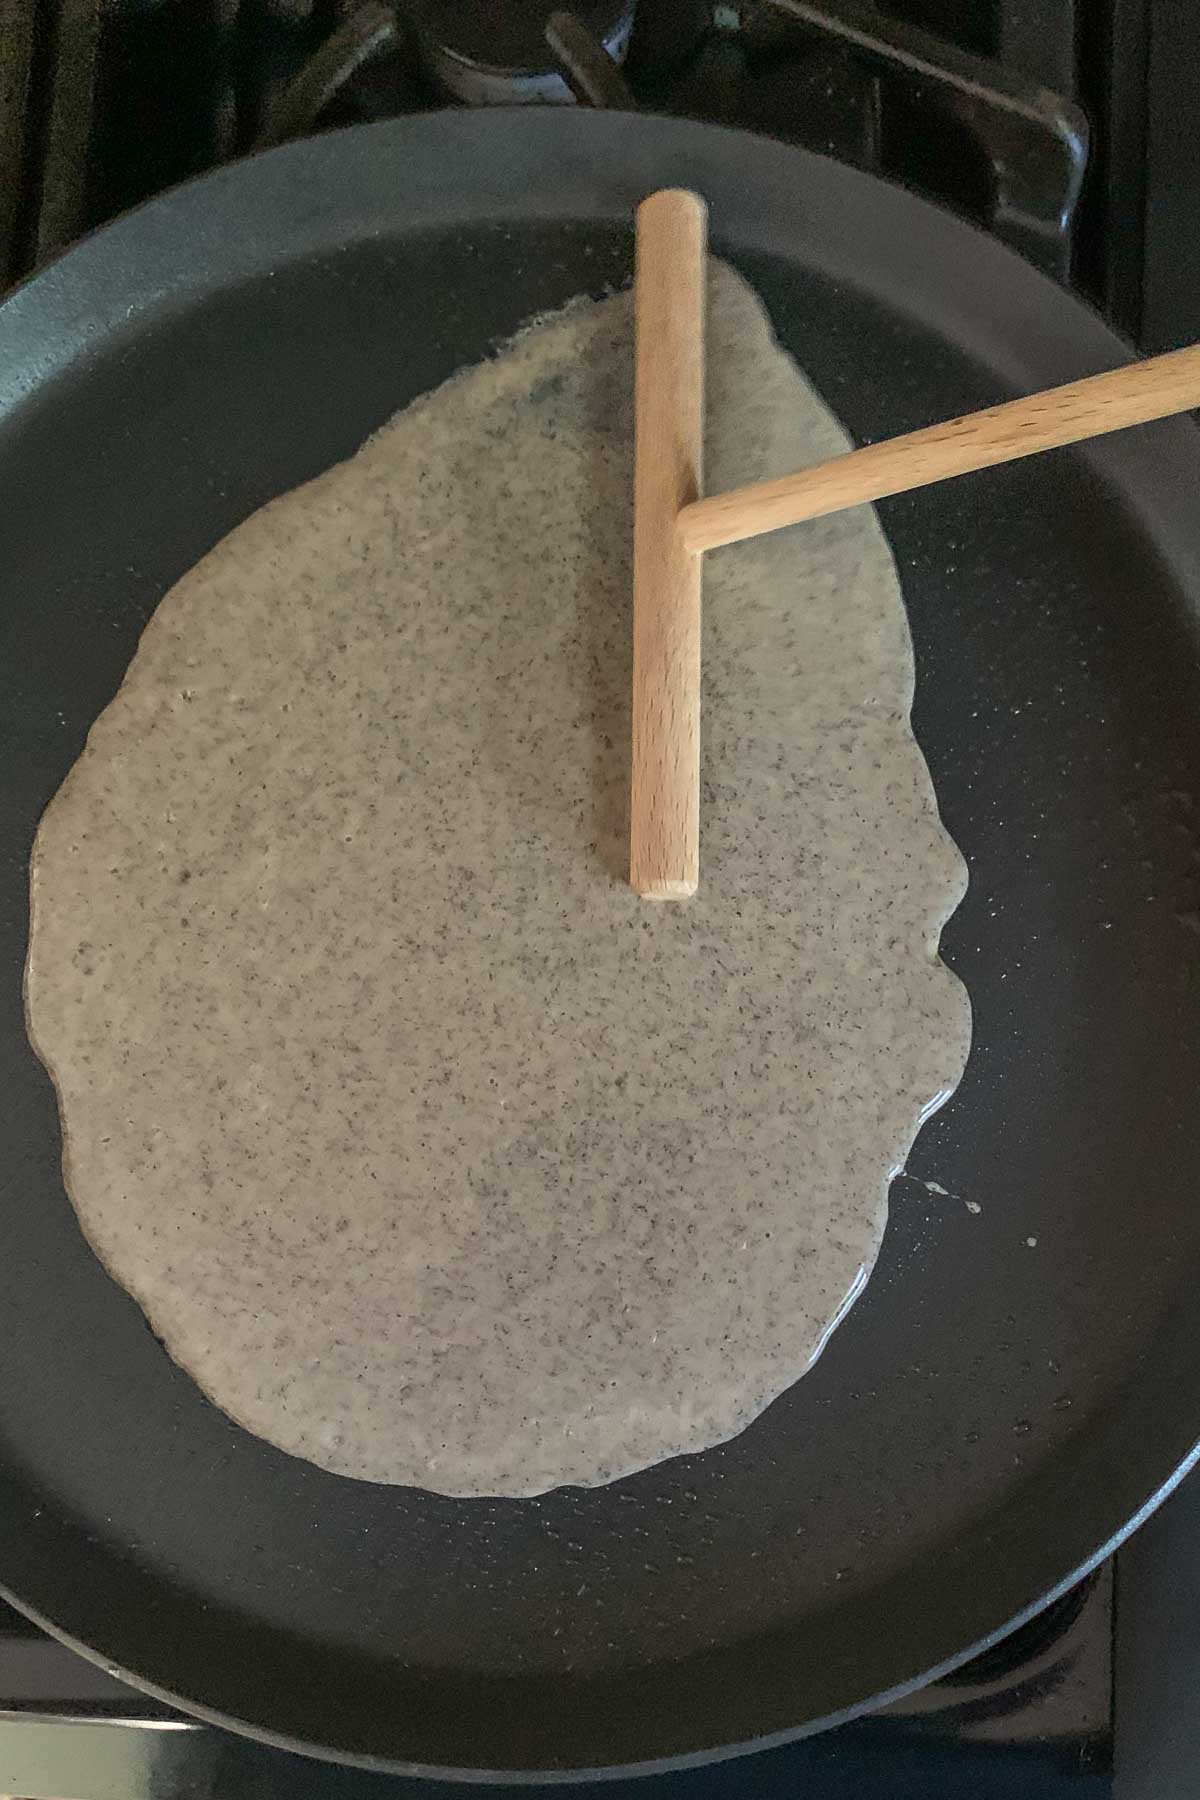 Spreading crepe batter onto a pan using a wooden crepe spreader.